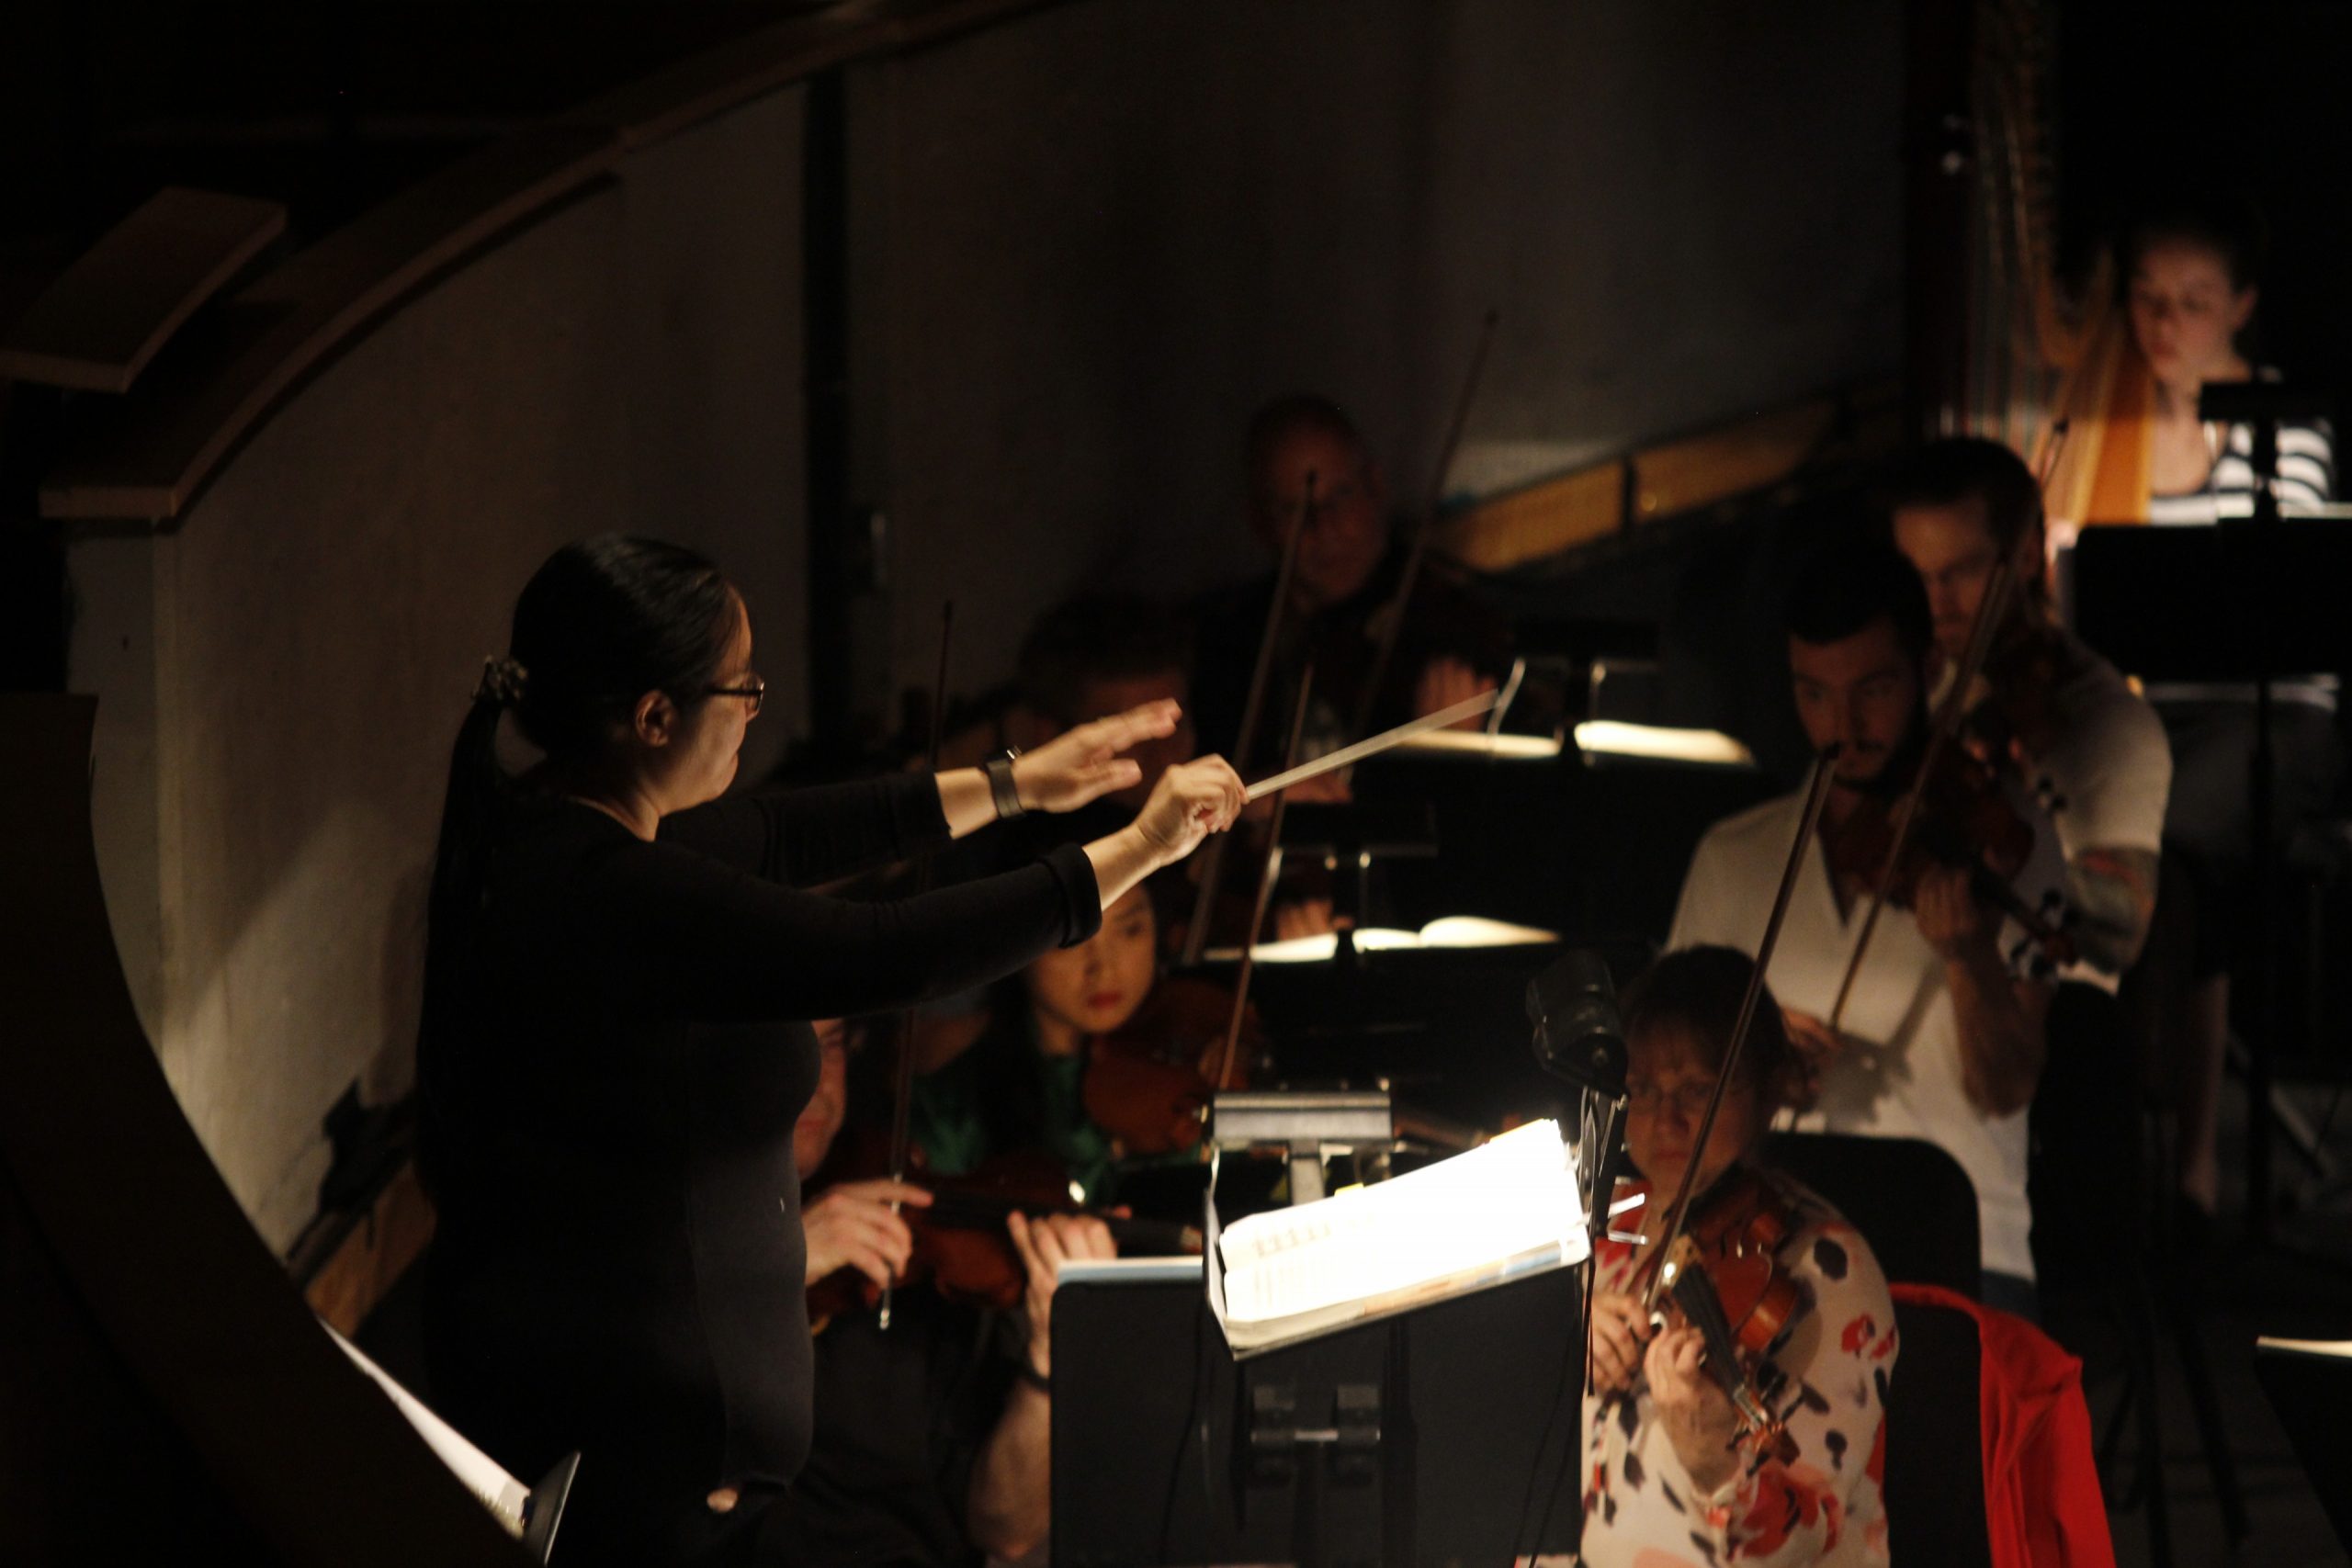 Women in Musical Leadership's Conductor Jennifer Tung leads her orchestra in a song.